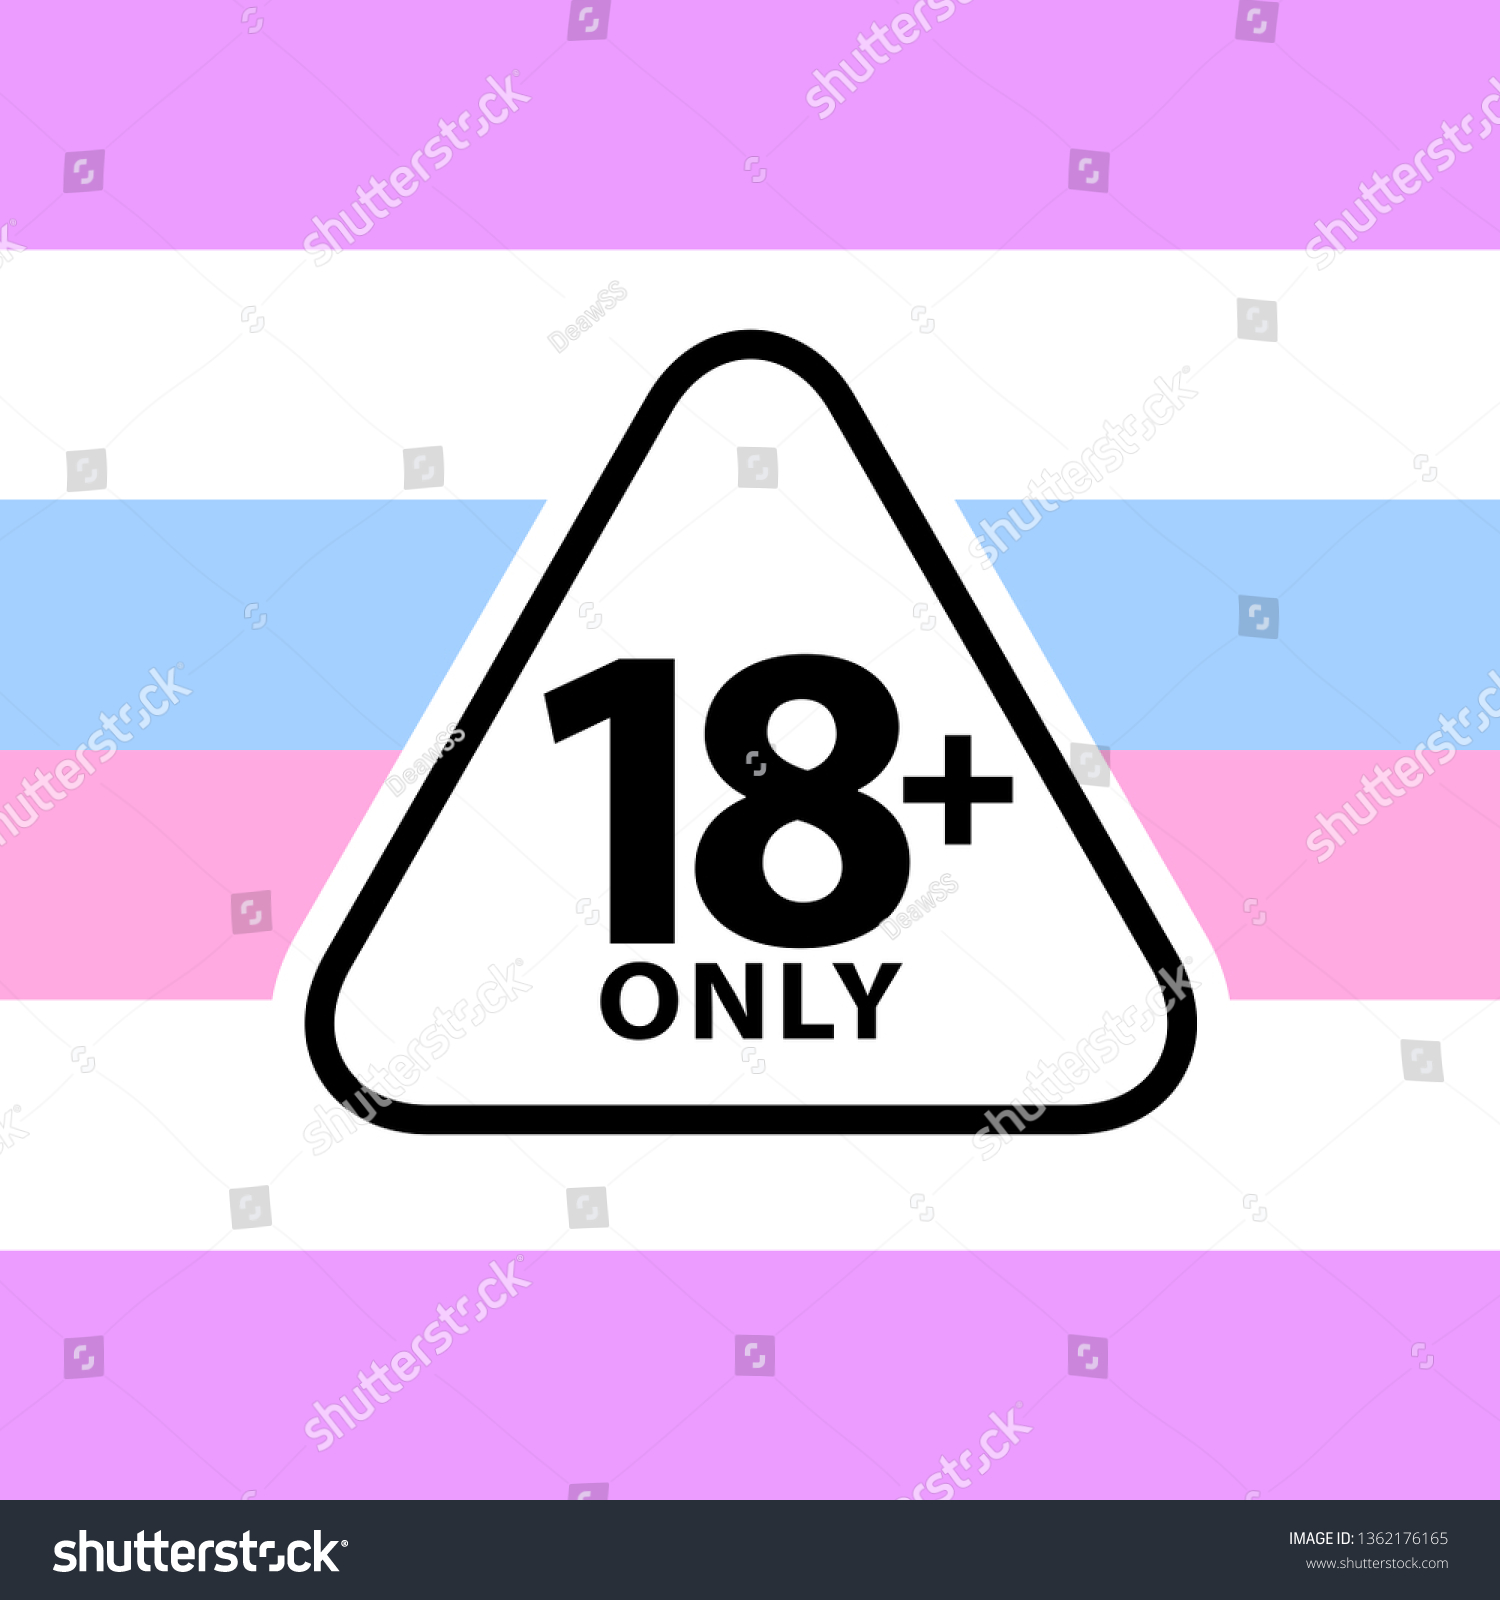 18 Plus Only Sign Warning Symbol Stock Vector Royalty Free 1362176165 Shutterstock 3677